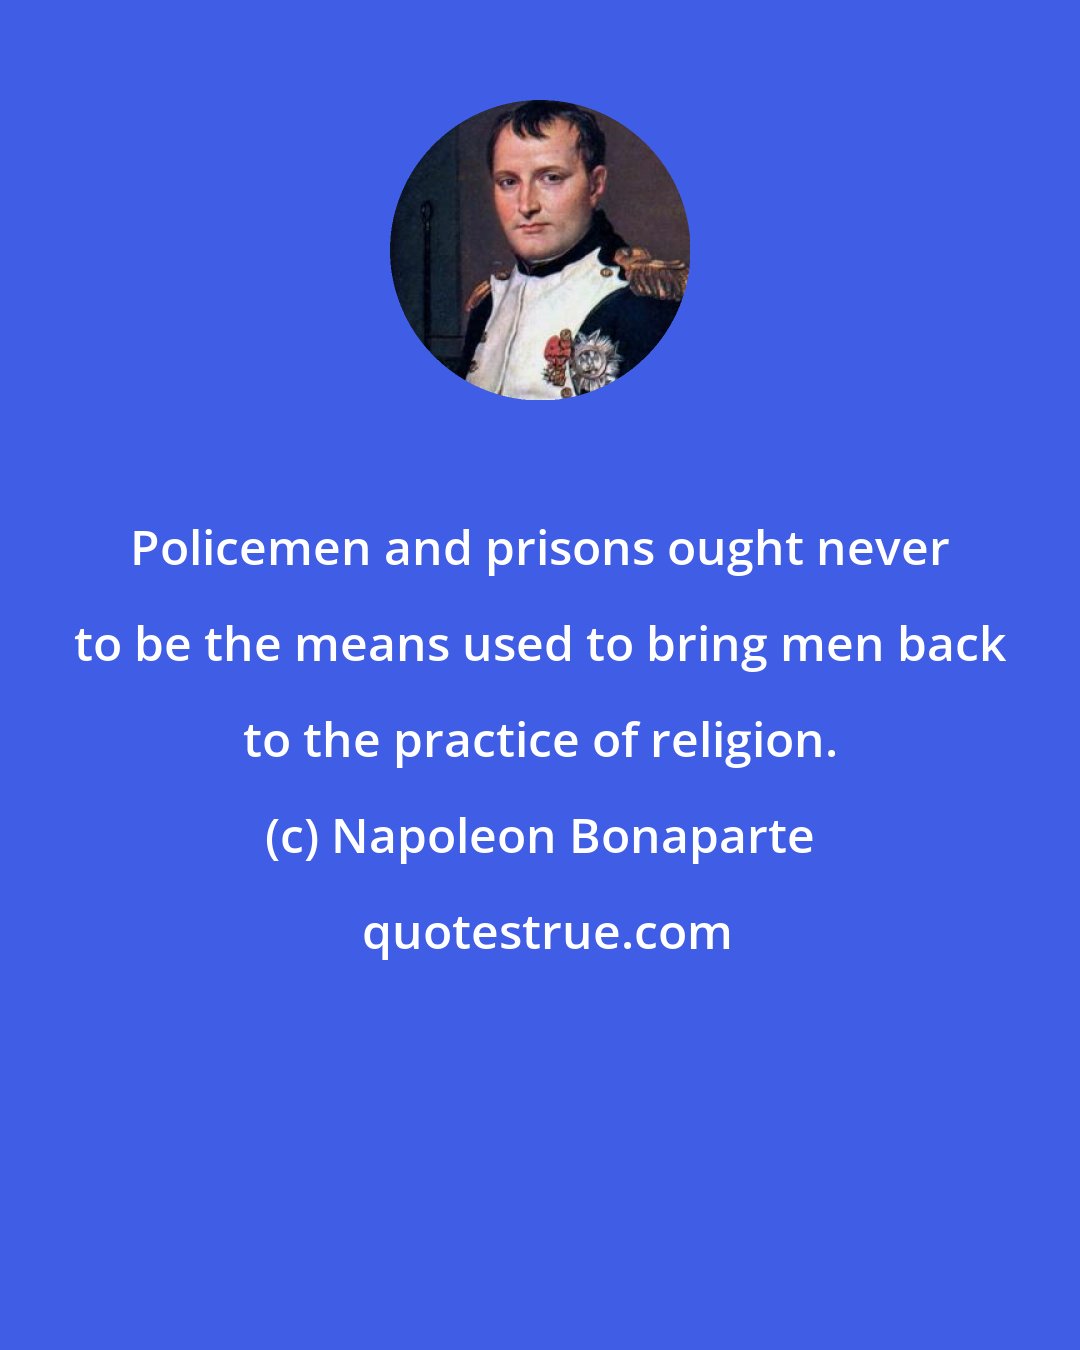 Napoleon Bonaparte: Policemen and prisons ought never to be the means used to bring men back to the practice of religion.